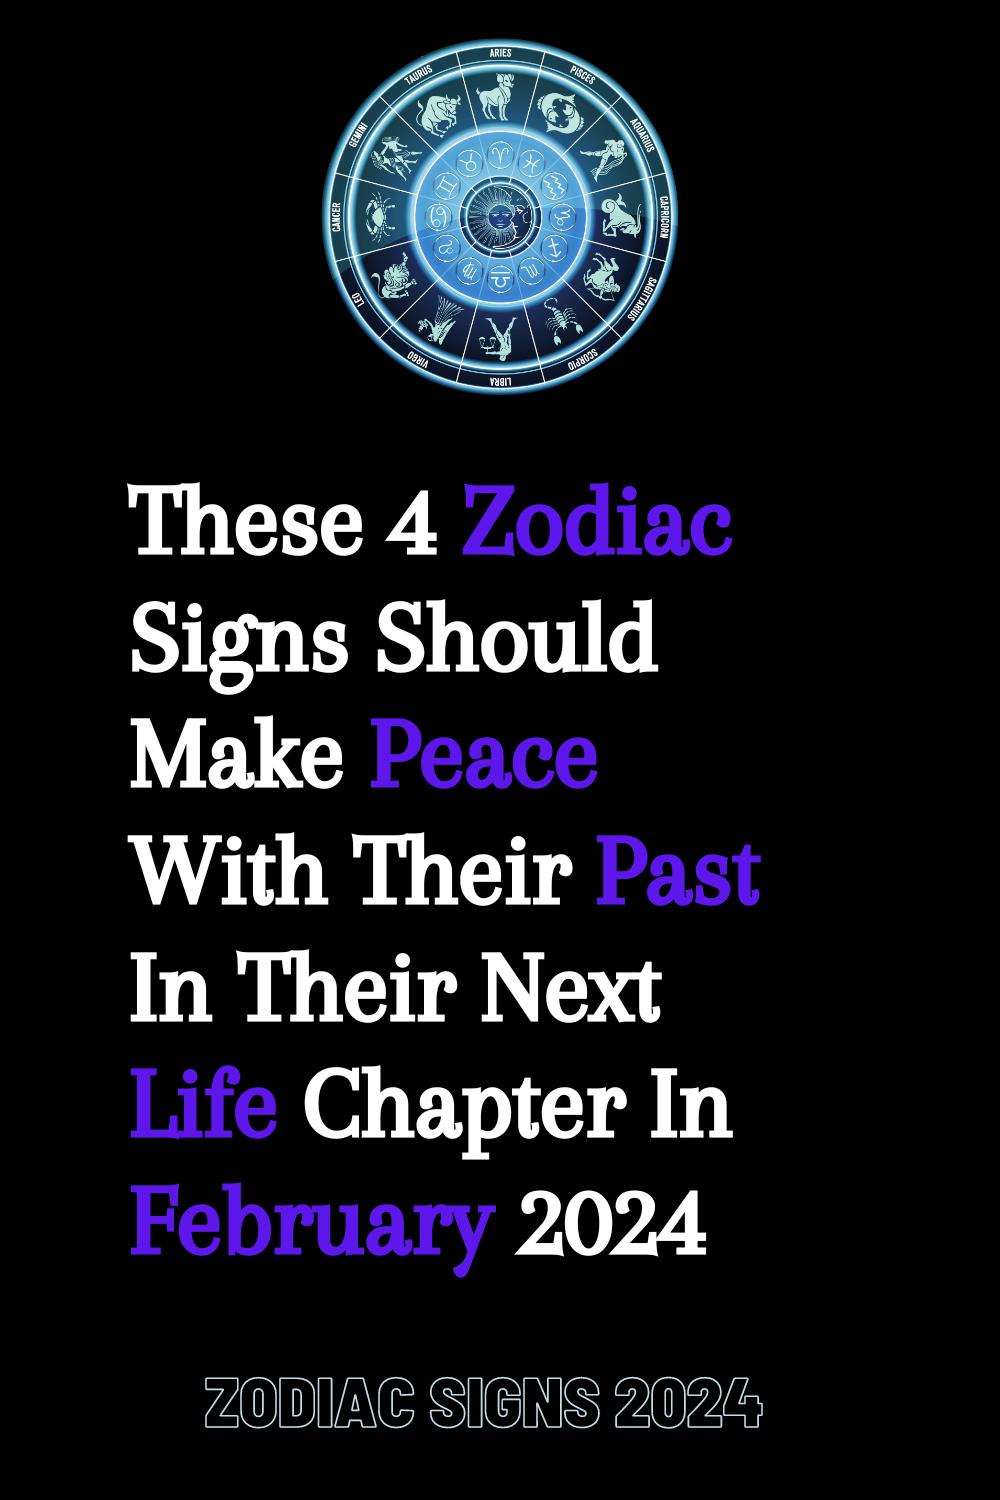 These 4 Zodiac Signs Should Make Peace With Their Past In Their Next Life Chapter In February 2024